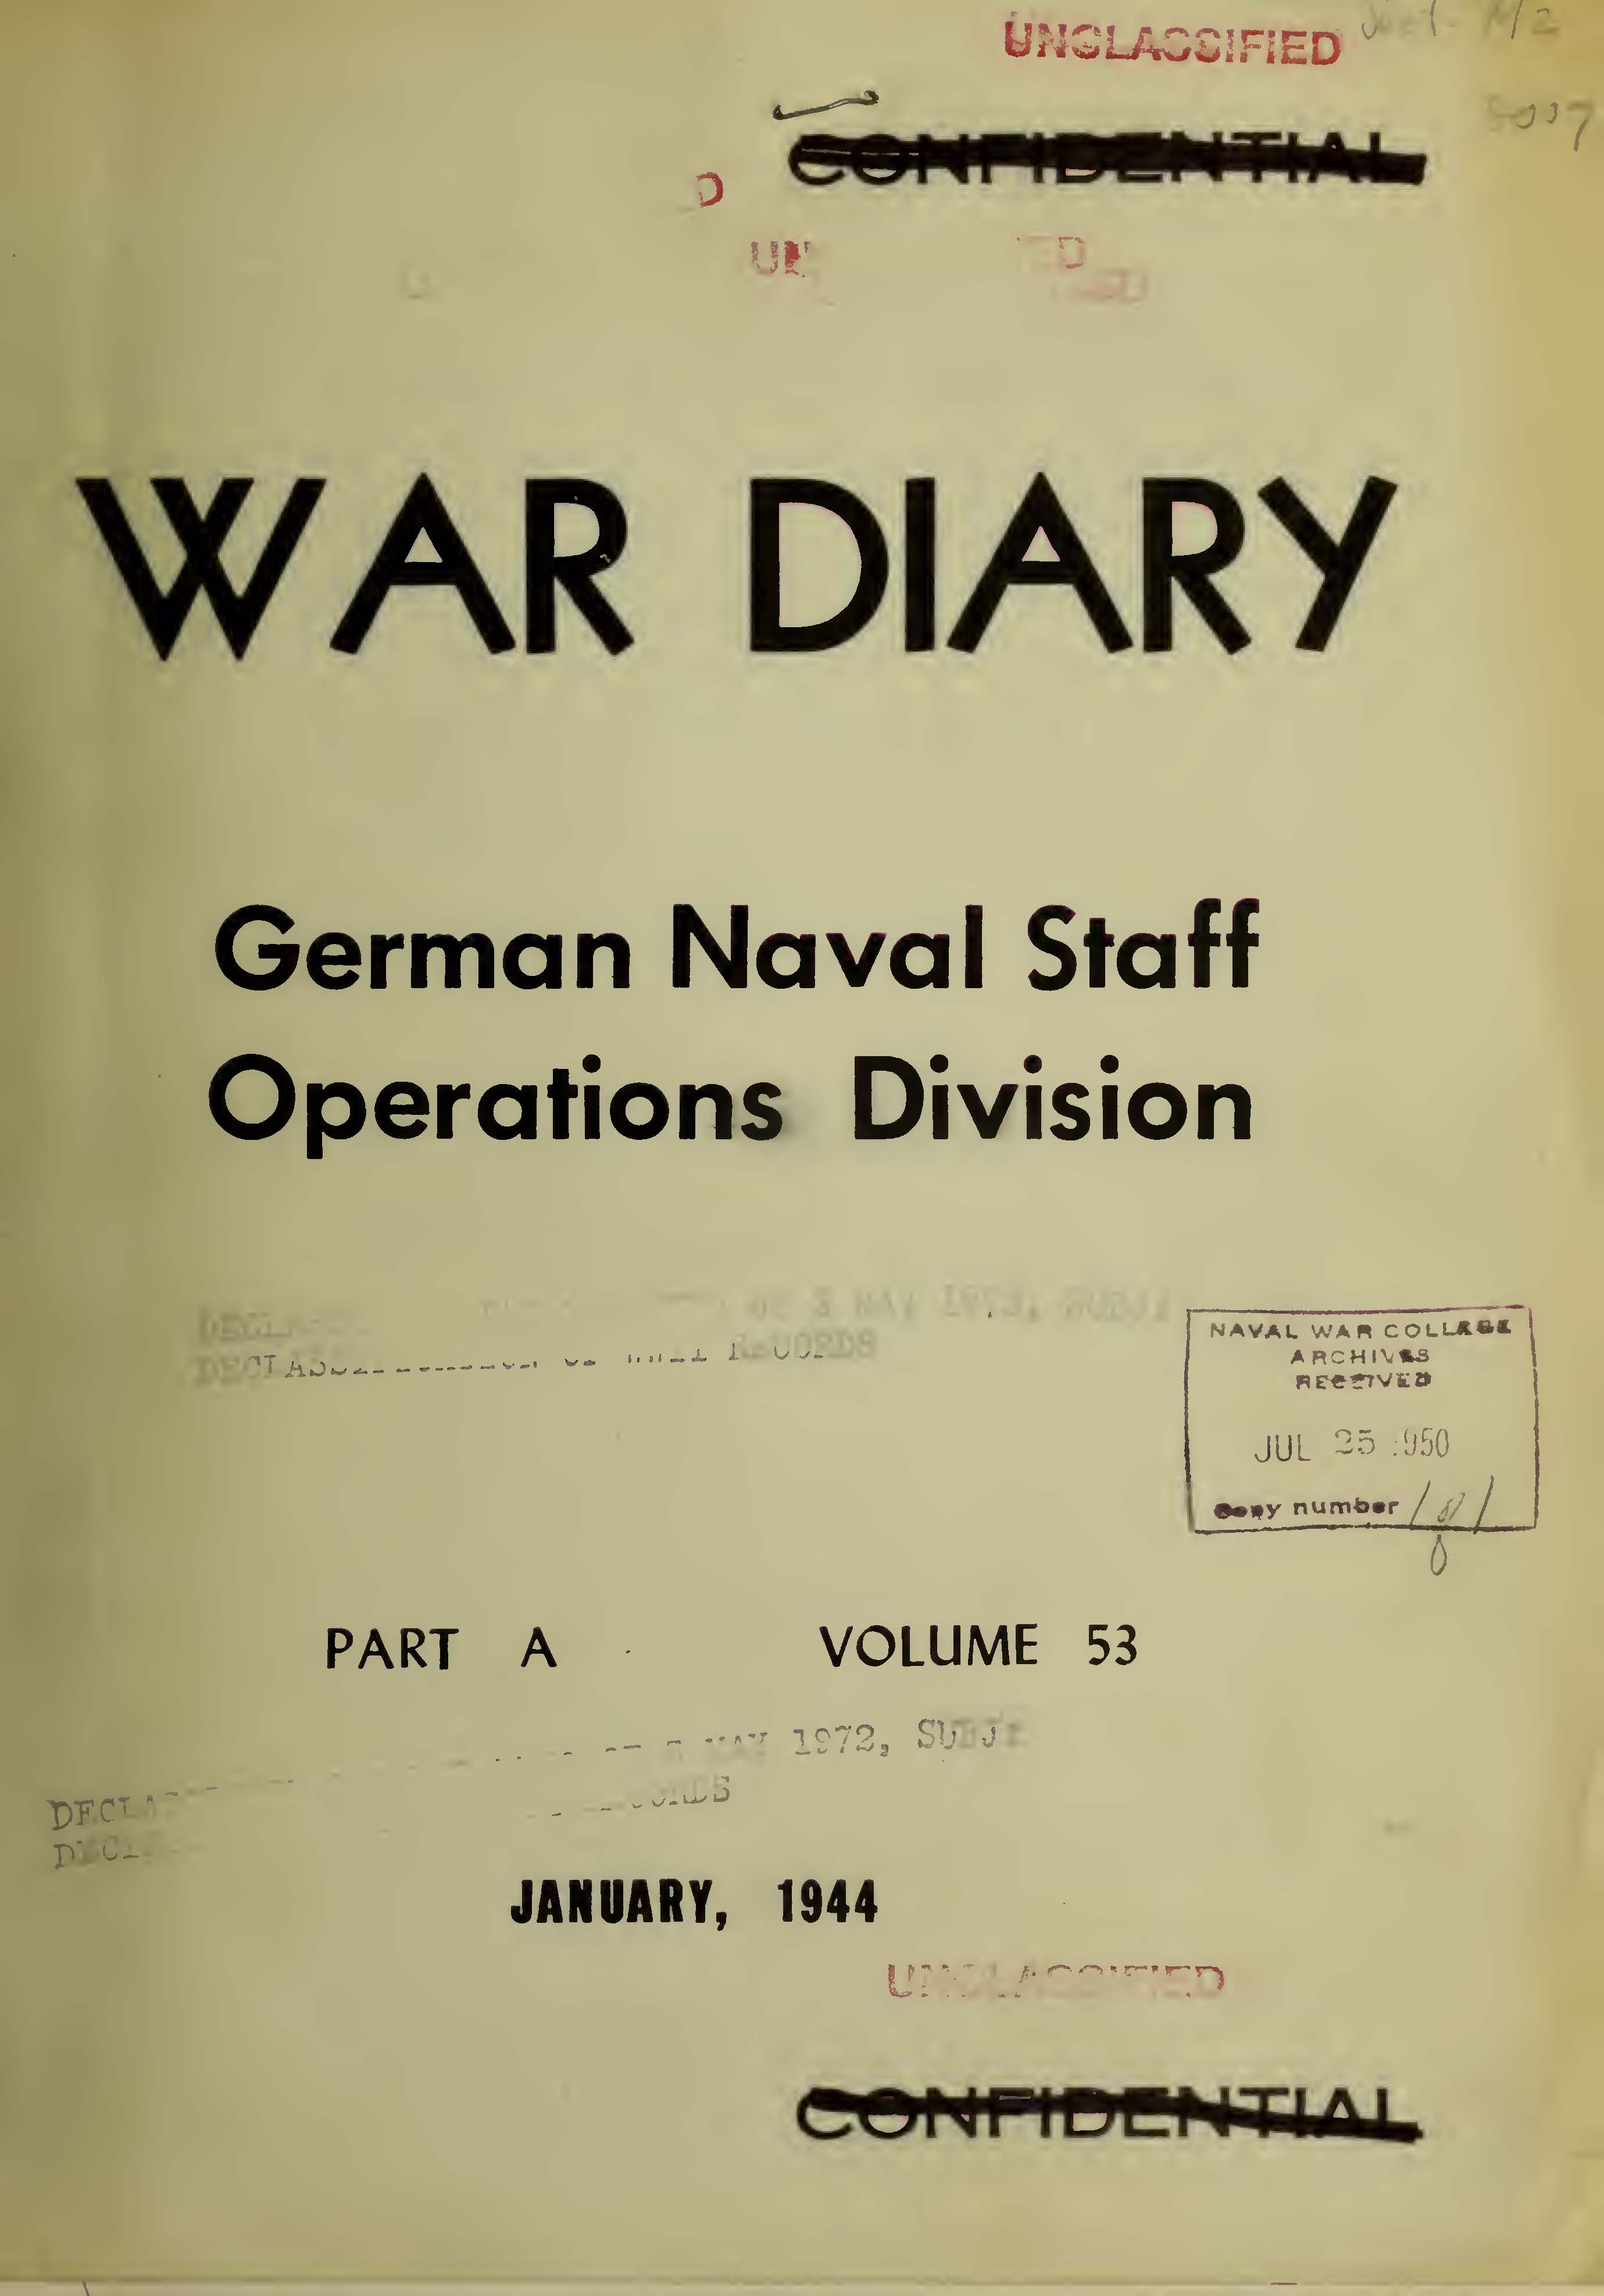 War Diary of German Naval Staff (Operations Division) Part A, Volume 53, January 1944